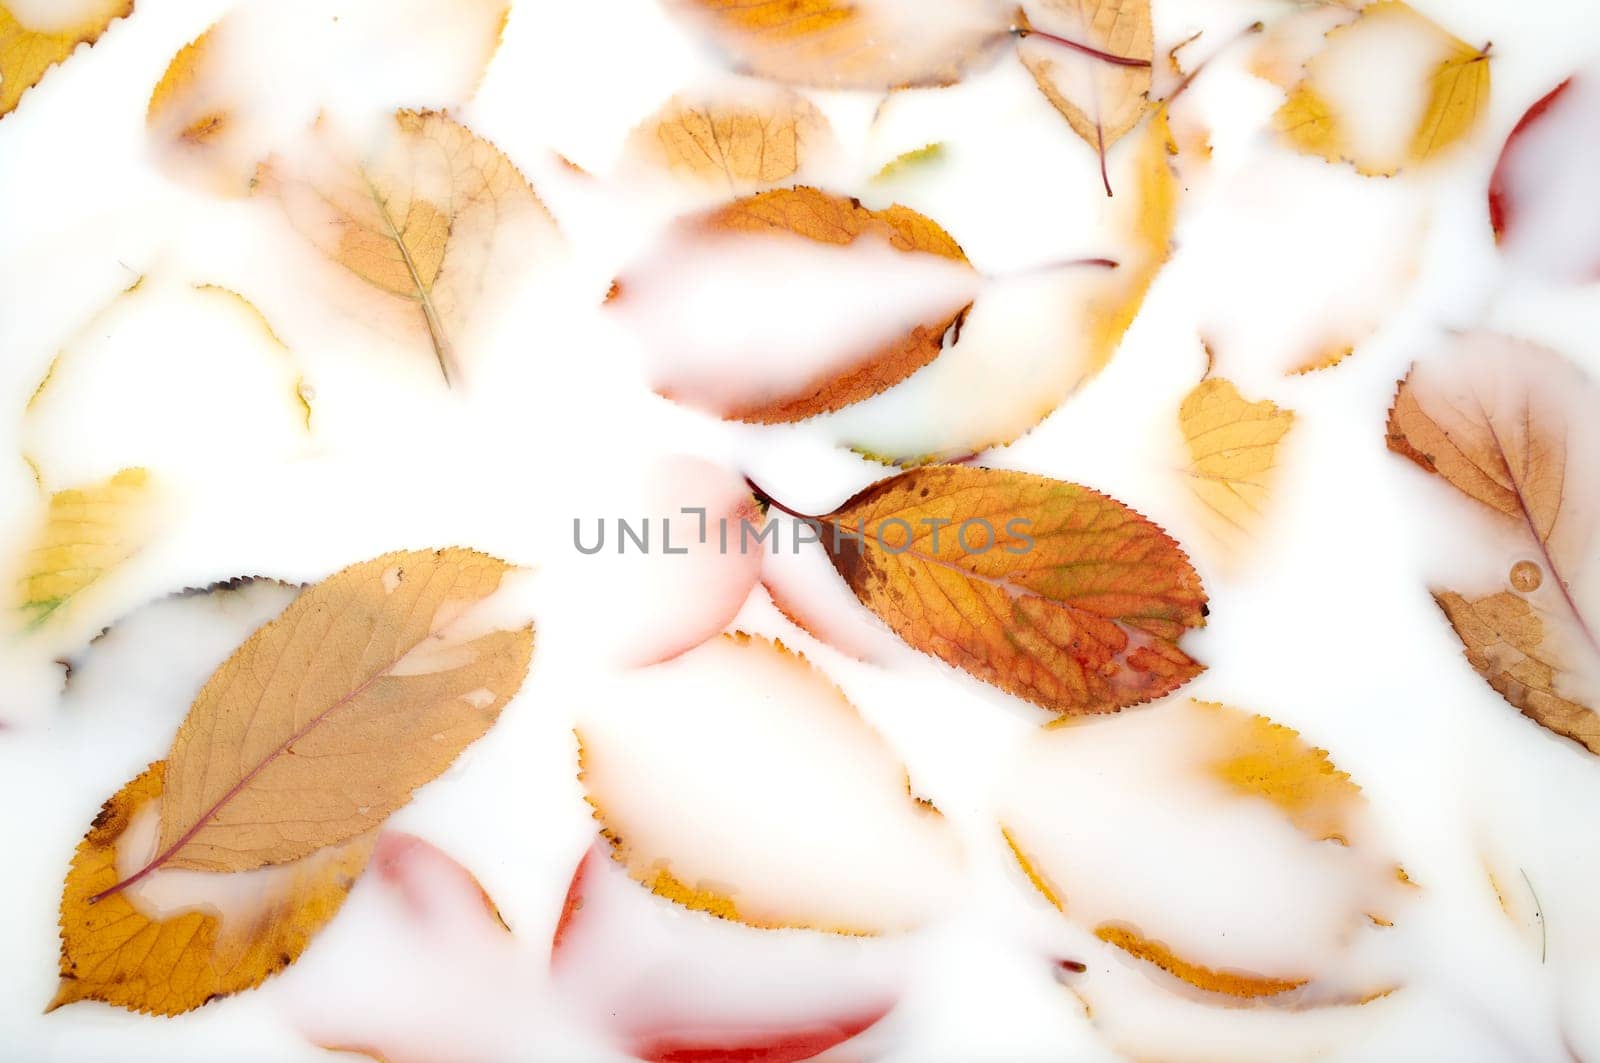 White liquid almost completely covers the background of fallen yellow leaves by Nadtochiy